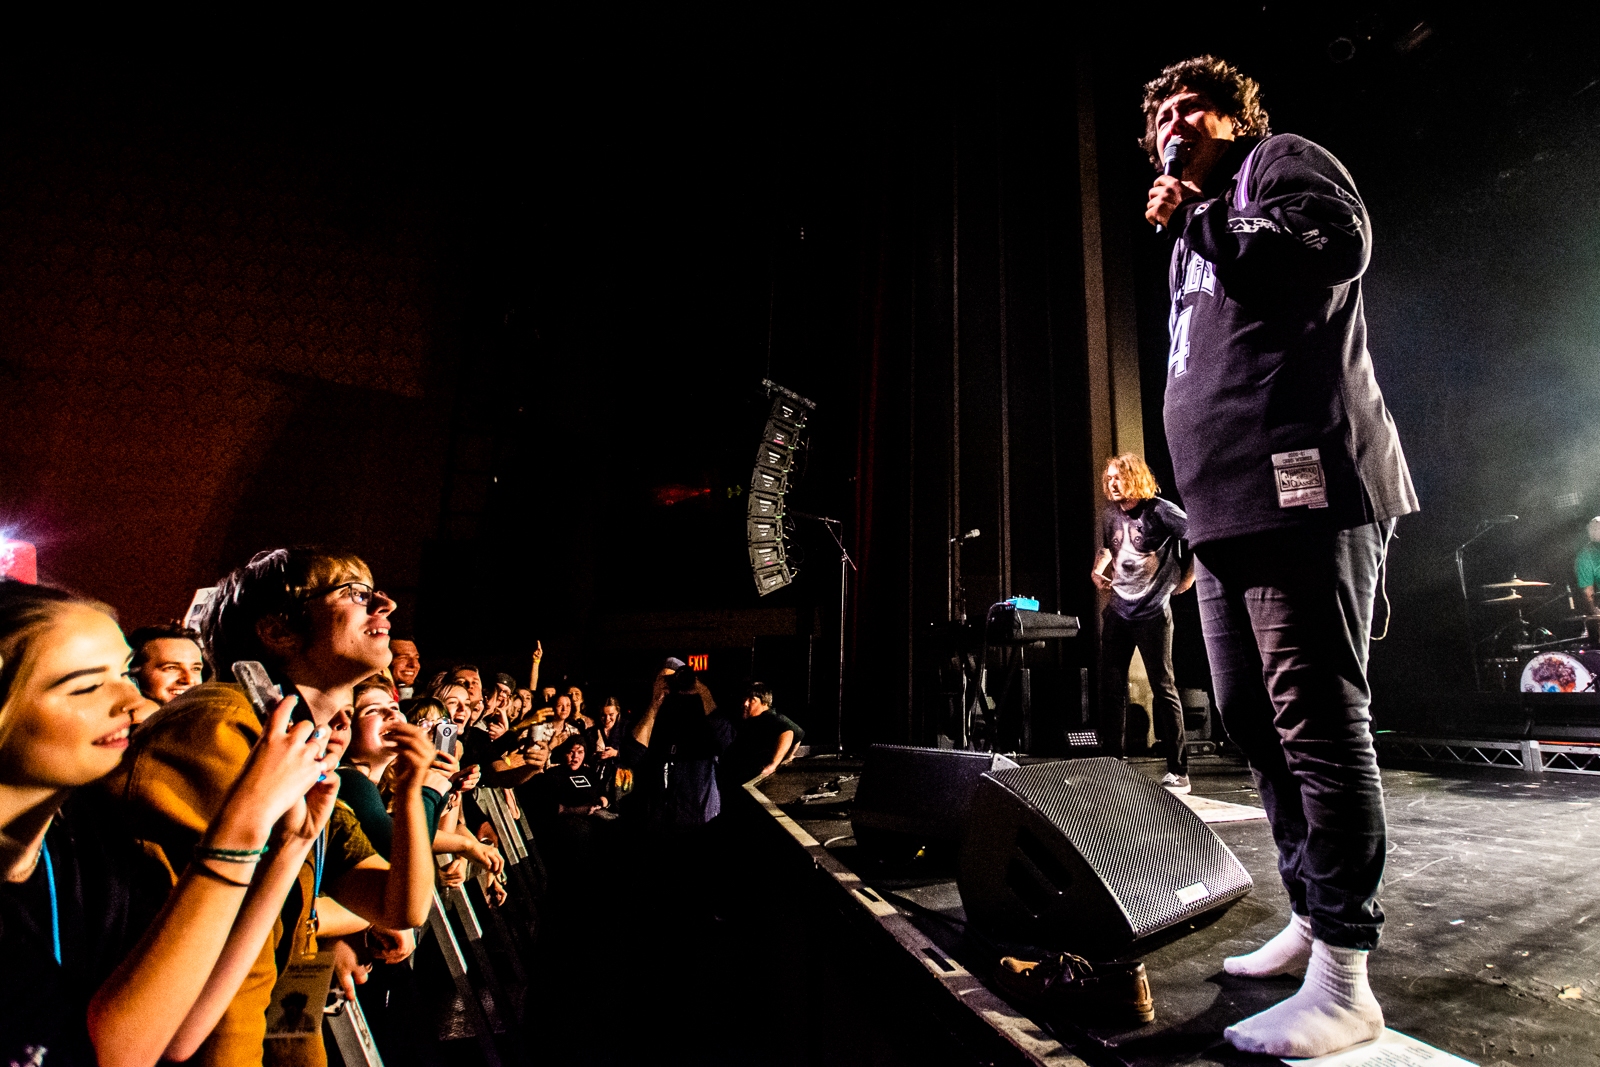 Hobo Johnson & The Lovemakers @ Vogue Theatre - Oct 10 2019